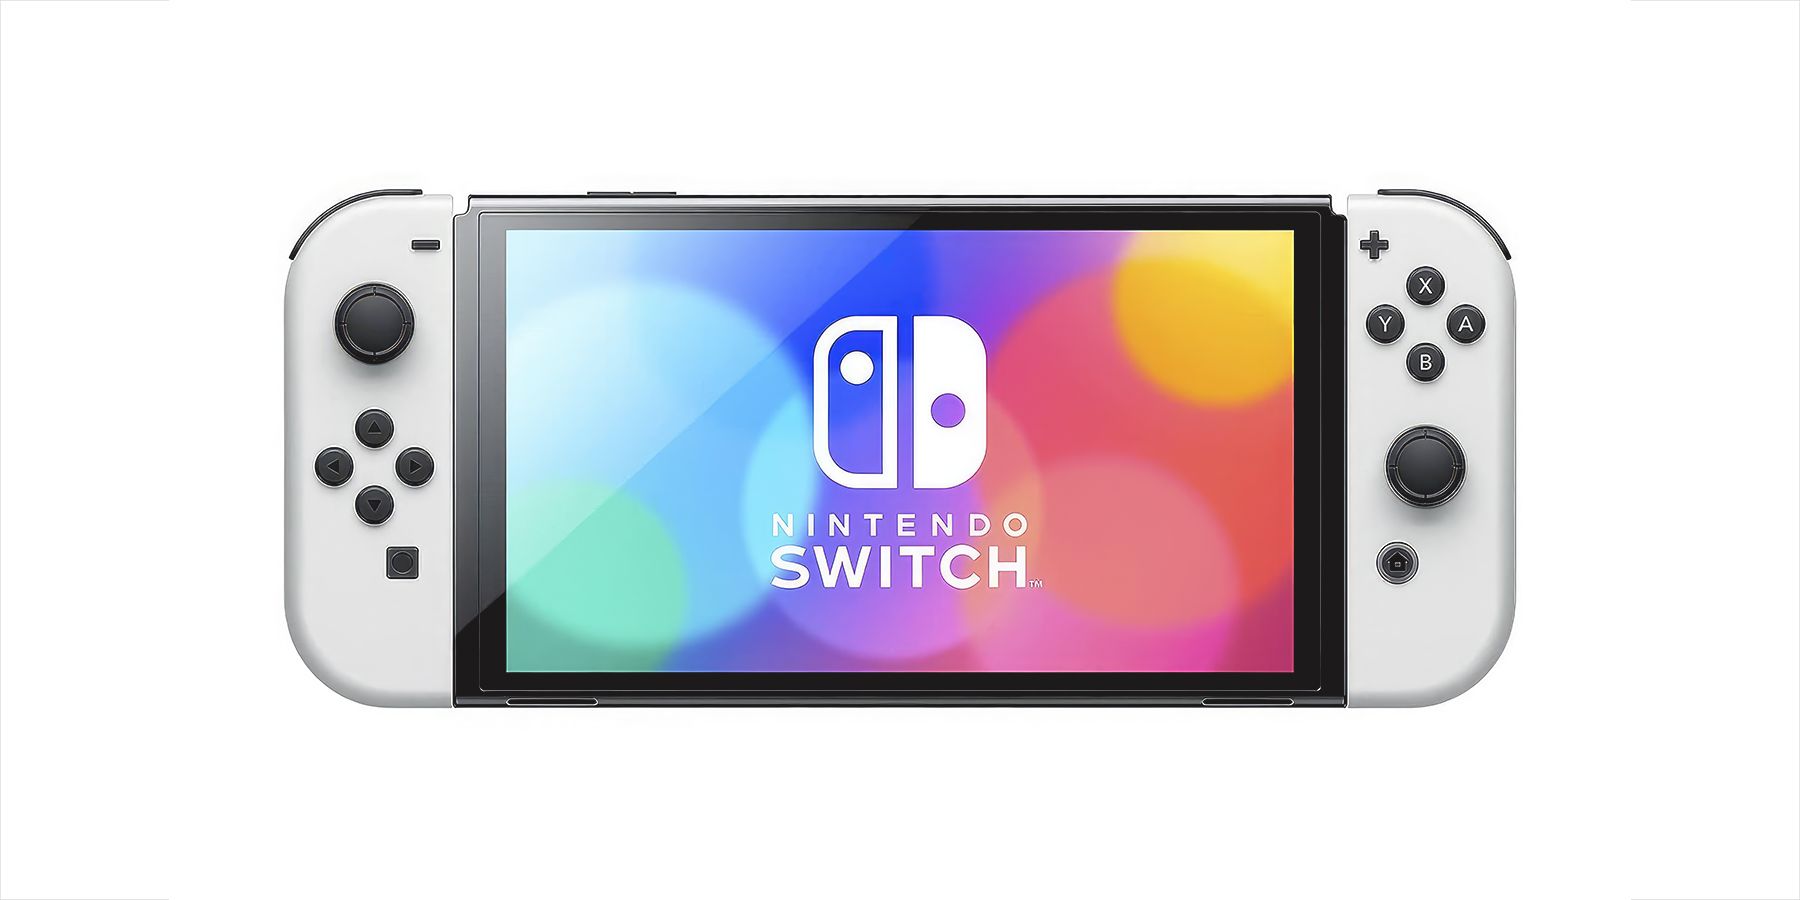 Super Mario Nintendo Switch OLED leaked ahead of upcoming Direct